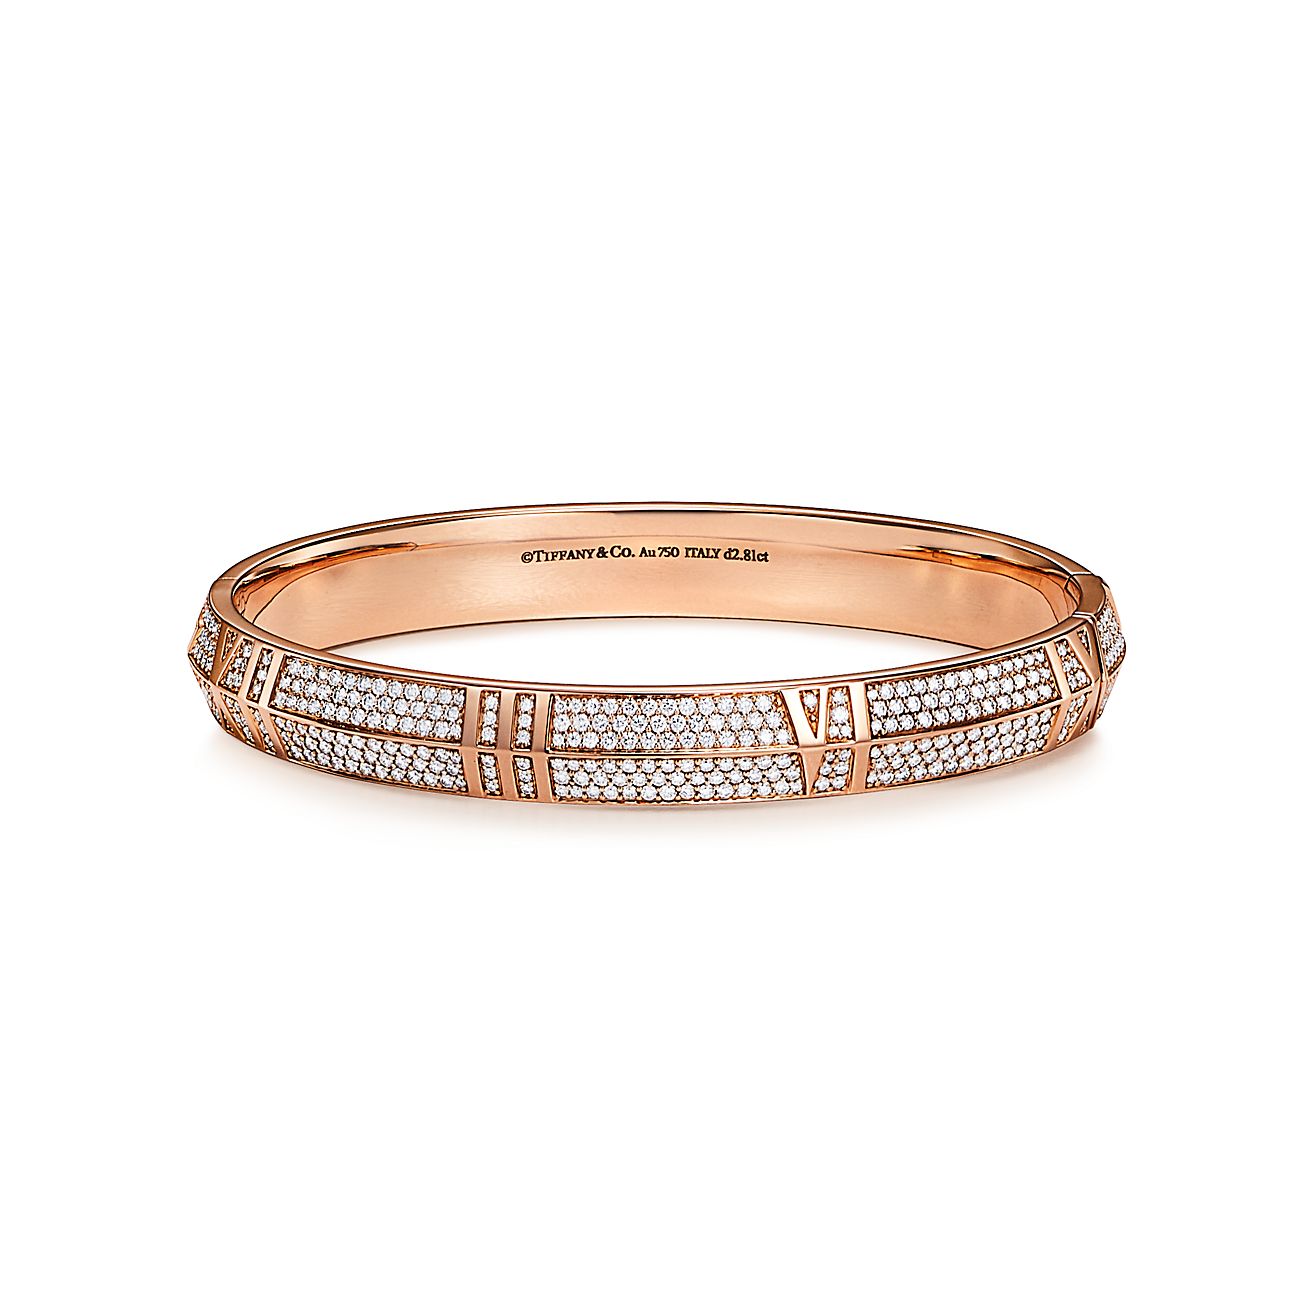 Atlas® X Closed Wide Hinged Bangle in Rose Gold with Pavé Diamonds |  Tiffany & Co.